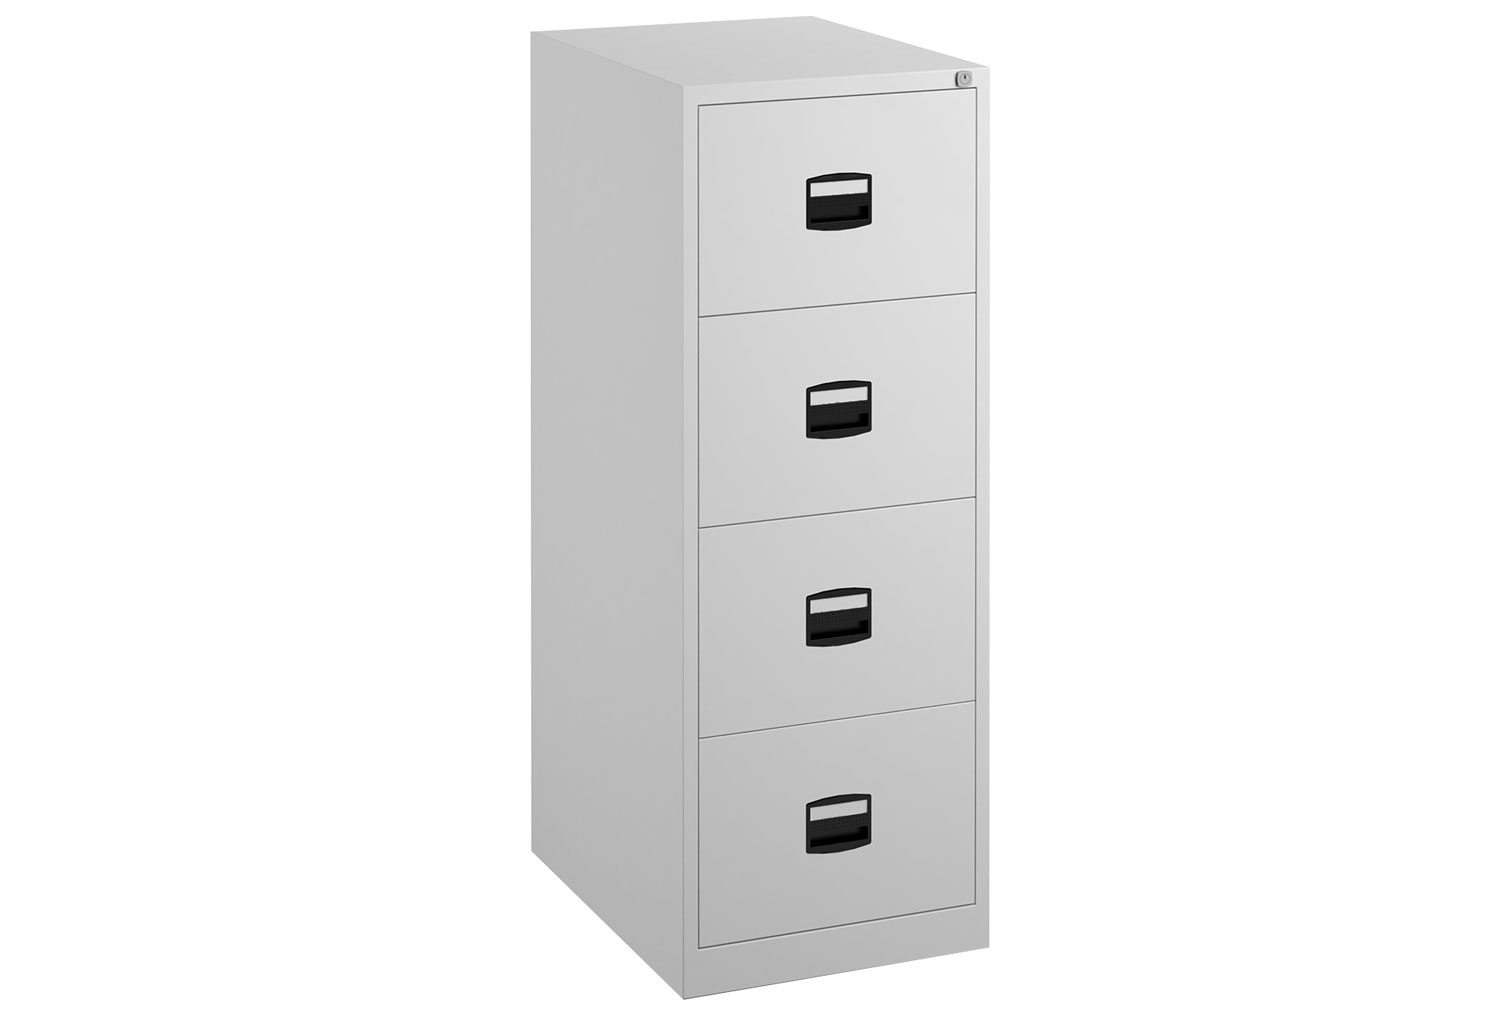 Bisley Economy Filing Cabinet (Central Handle), 4 Drawer - 47wx62dx132h (cm), White, Express Delivery